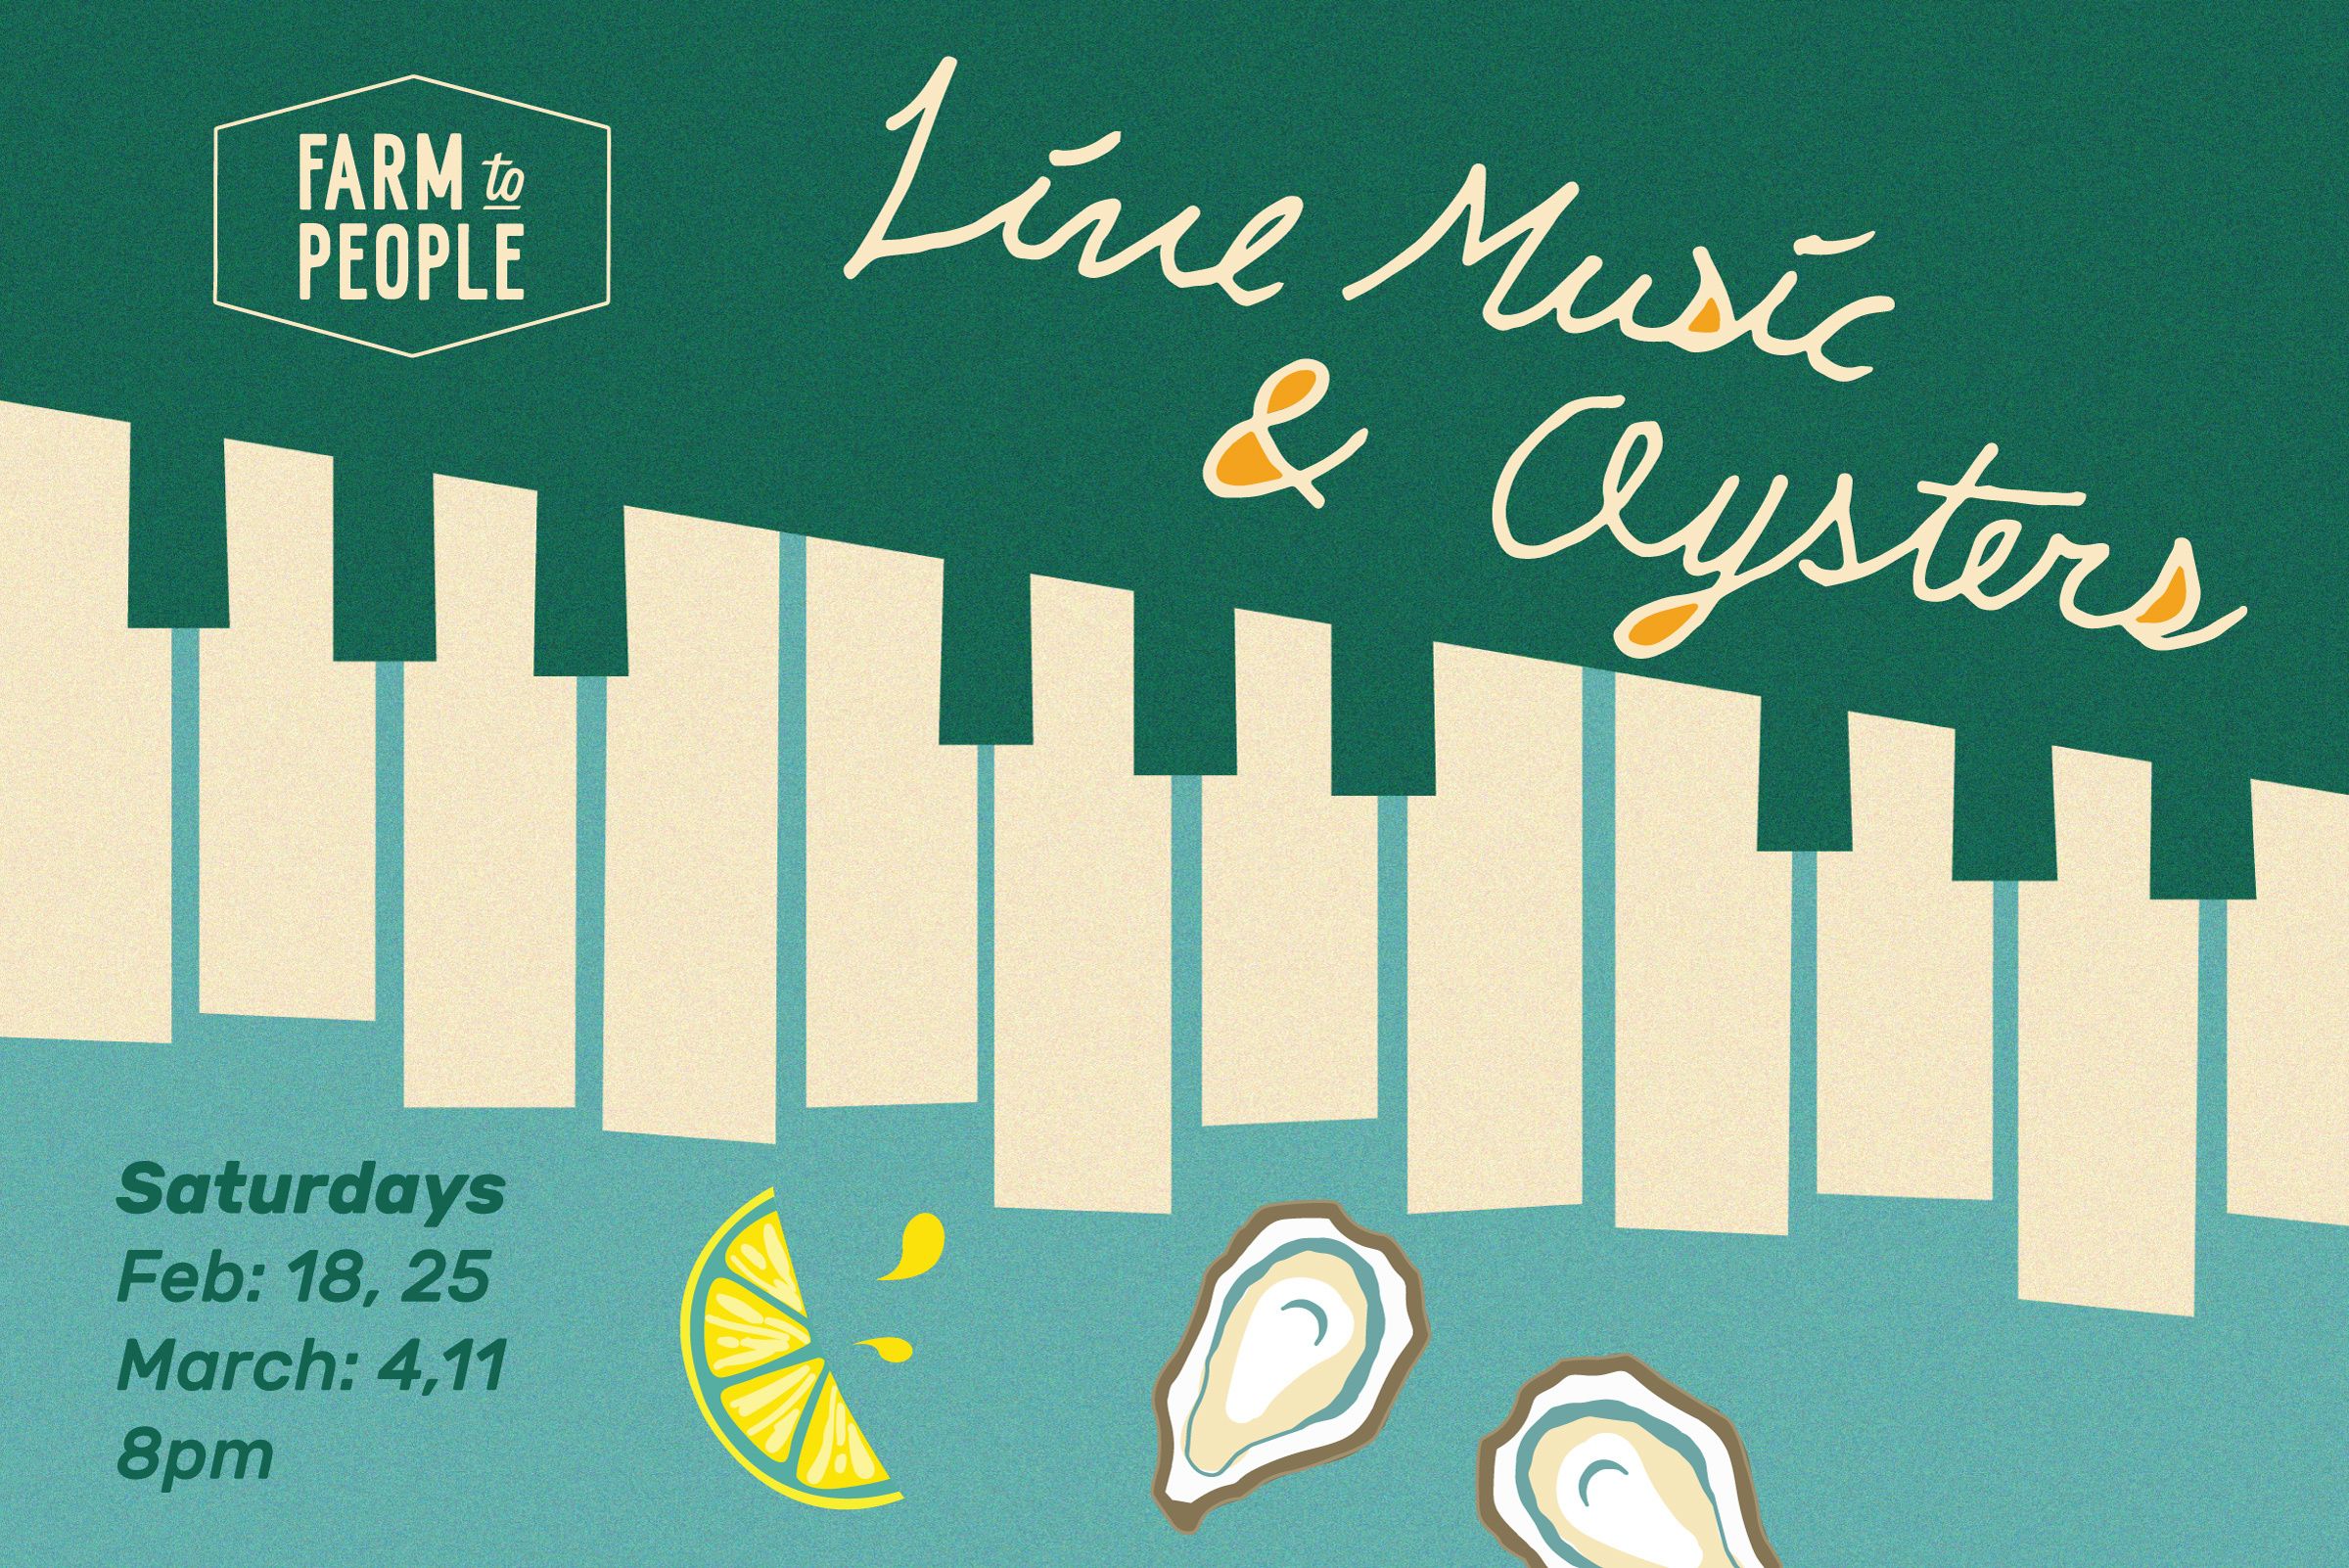 Live Music & Oysters